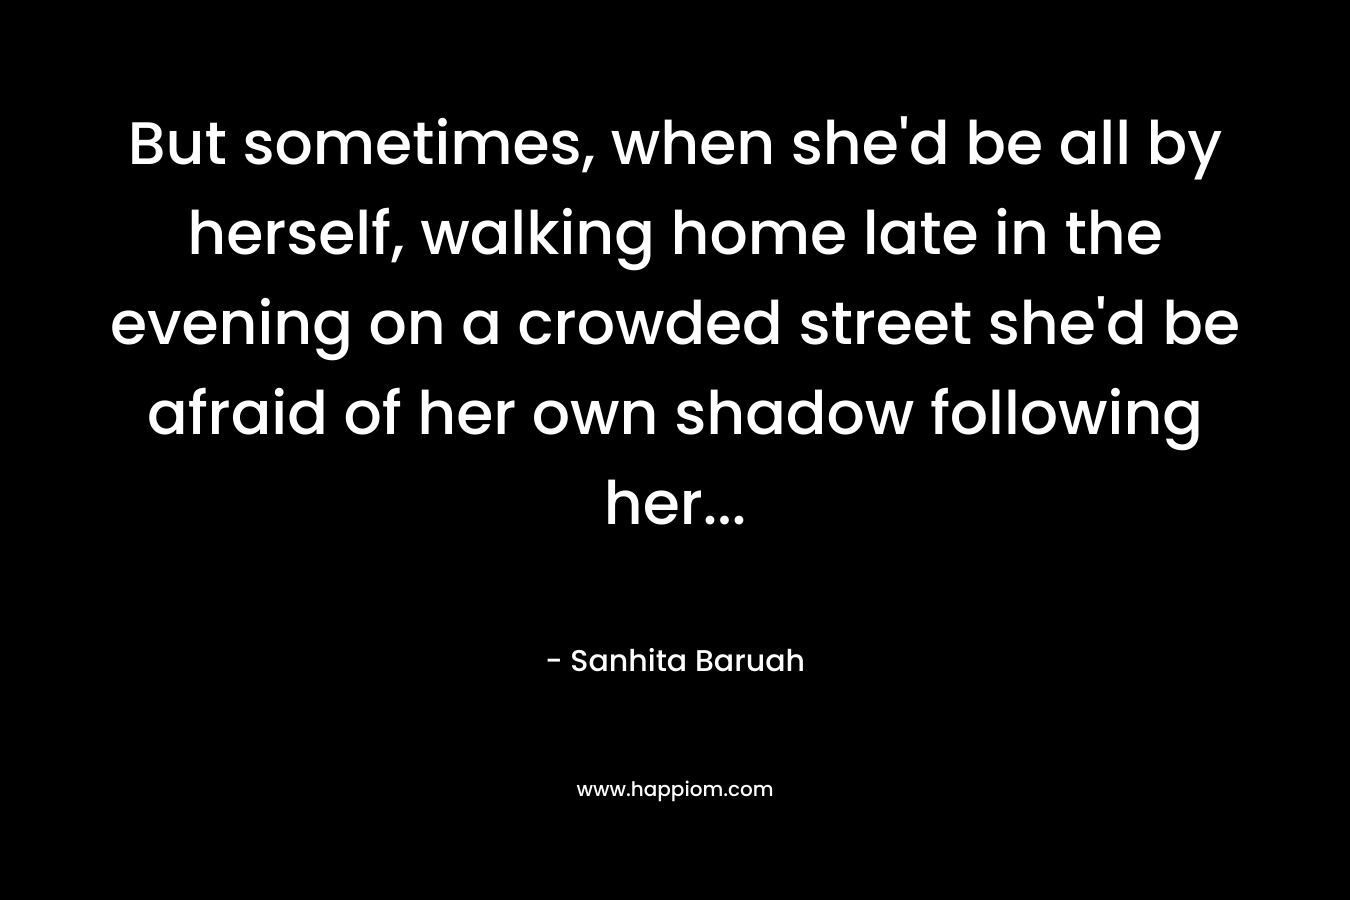 But sometimes, when she'd be all by herself, walking home late in the evening on a crowded street she'd be afraid of her own shadow following her...